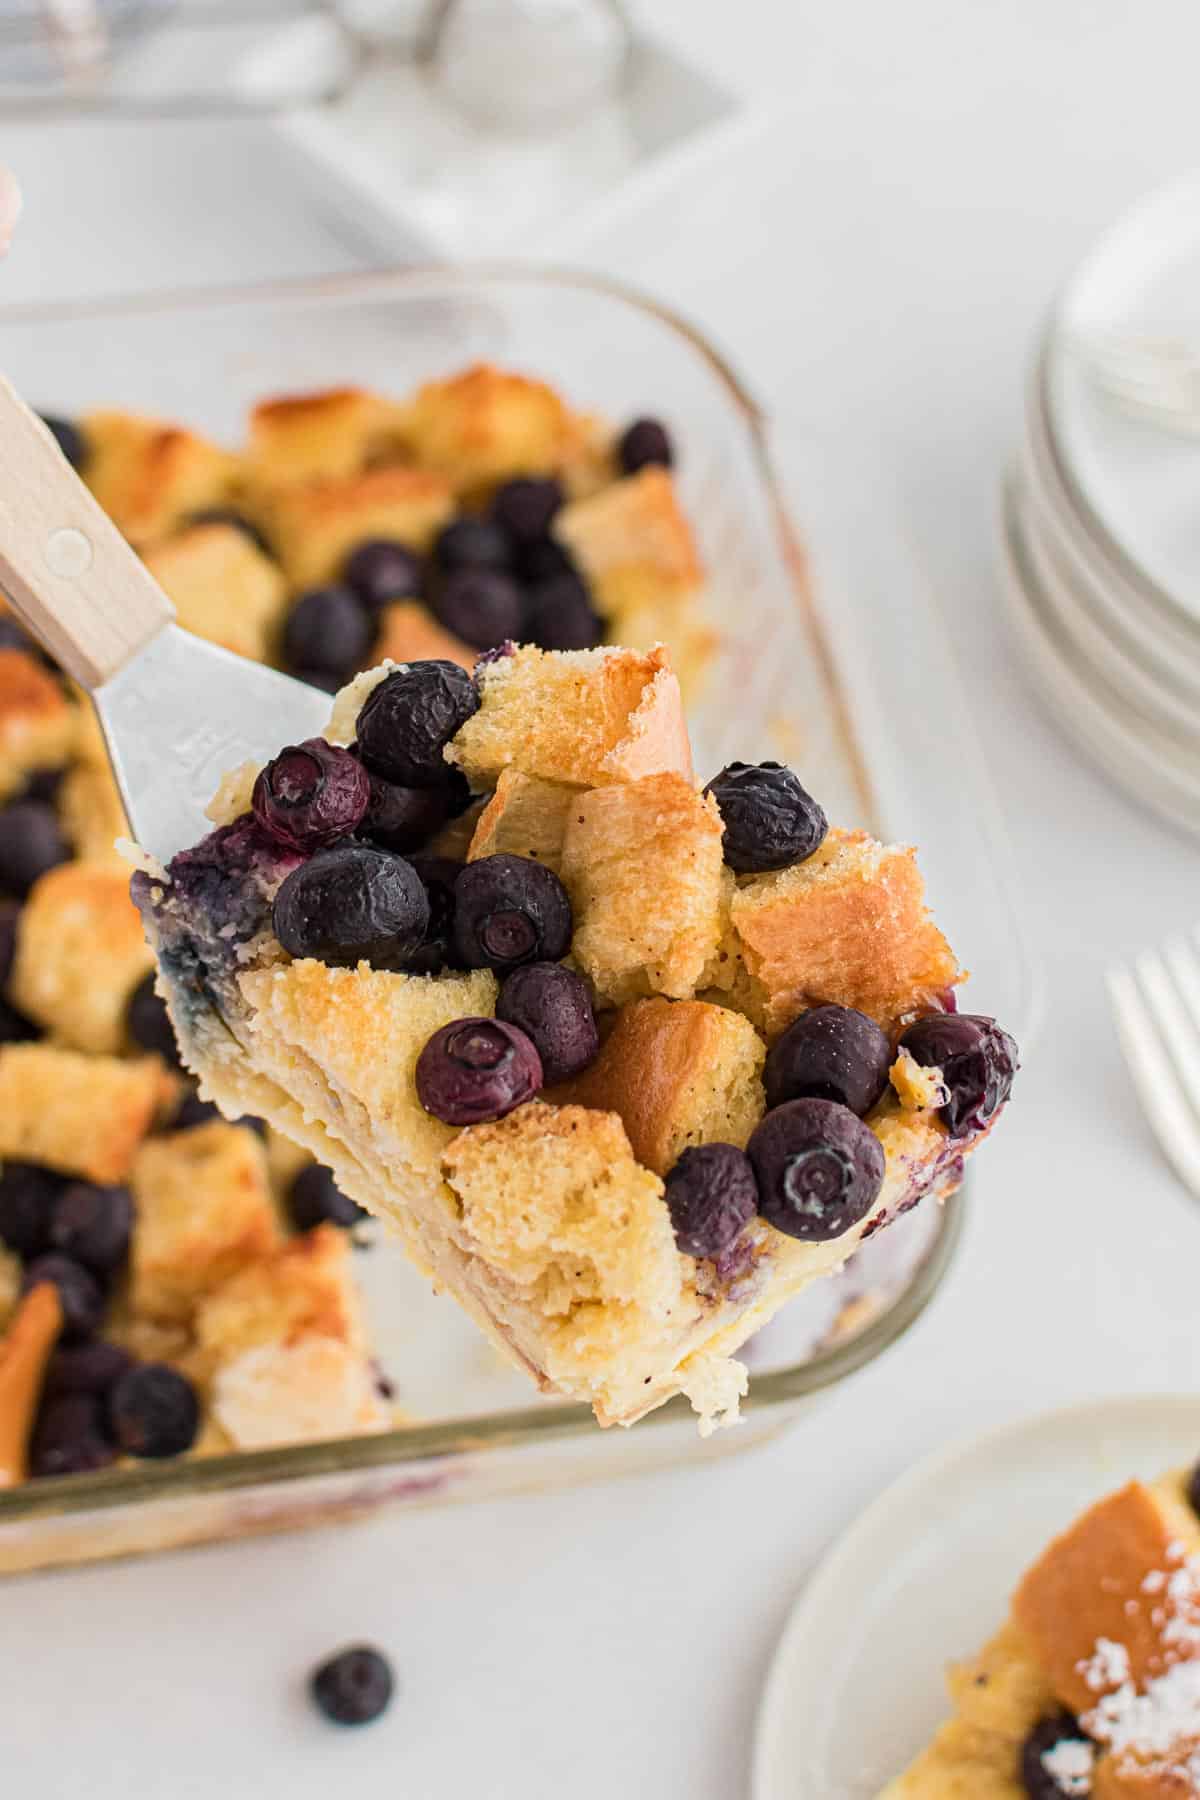 A slice of blueberry bread pudding being scooped out of a square glass pan.